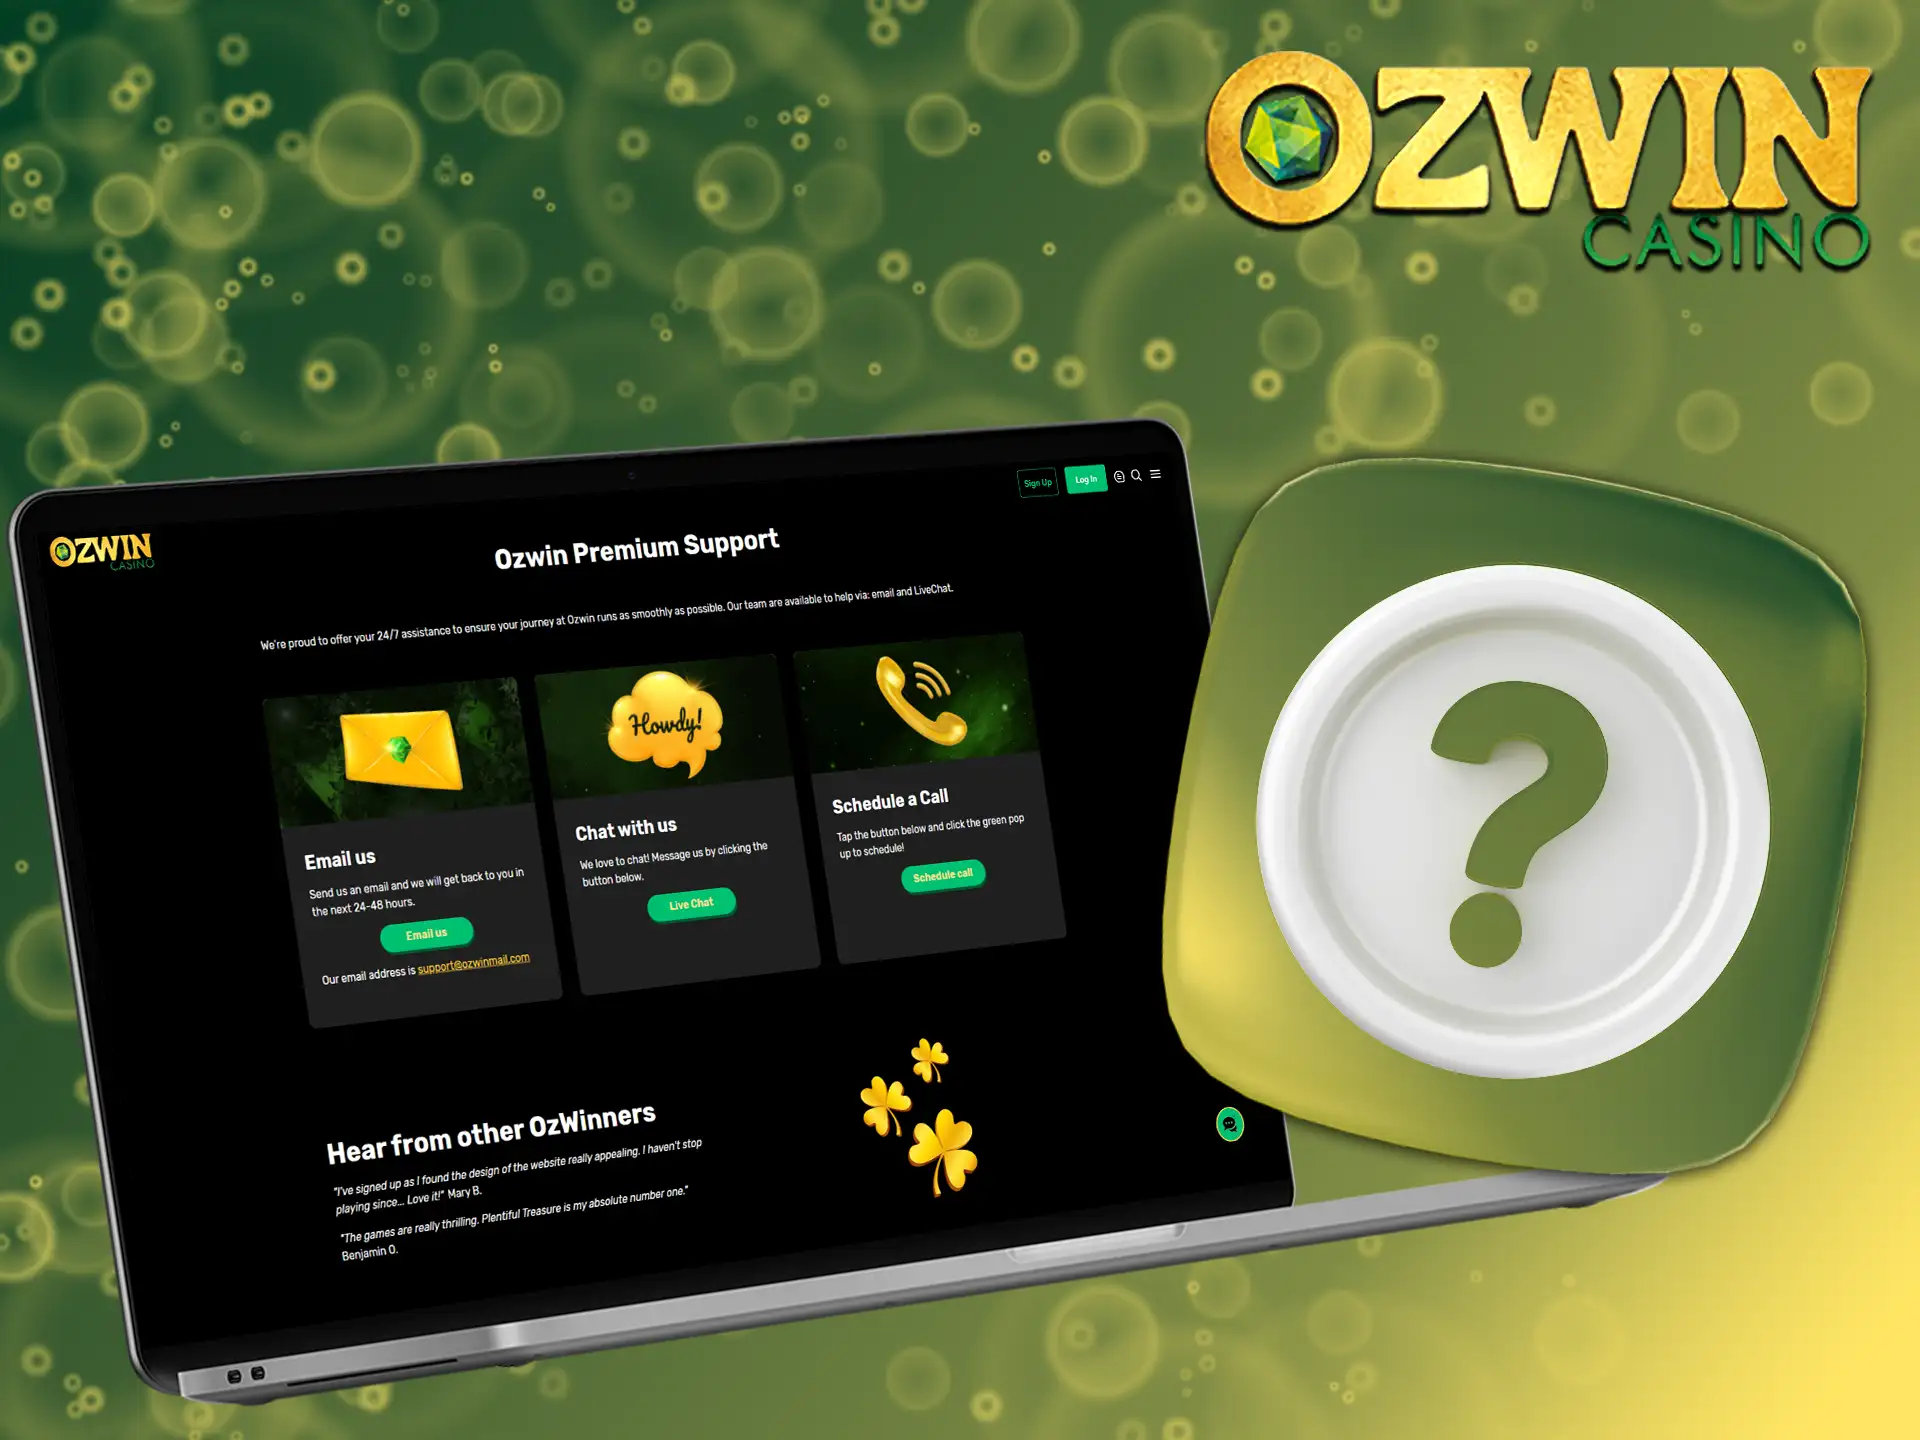 Ozwin Casino's friendly customer service team is always on hand to answer your questions and resolve any issues you might encounter.